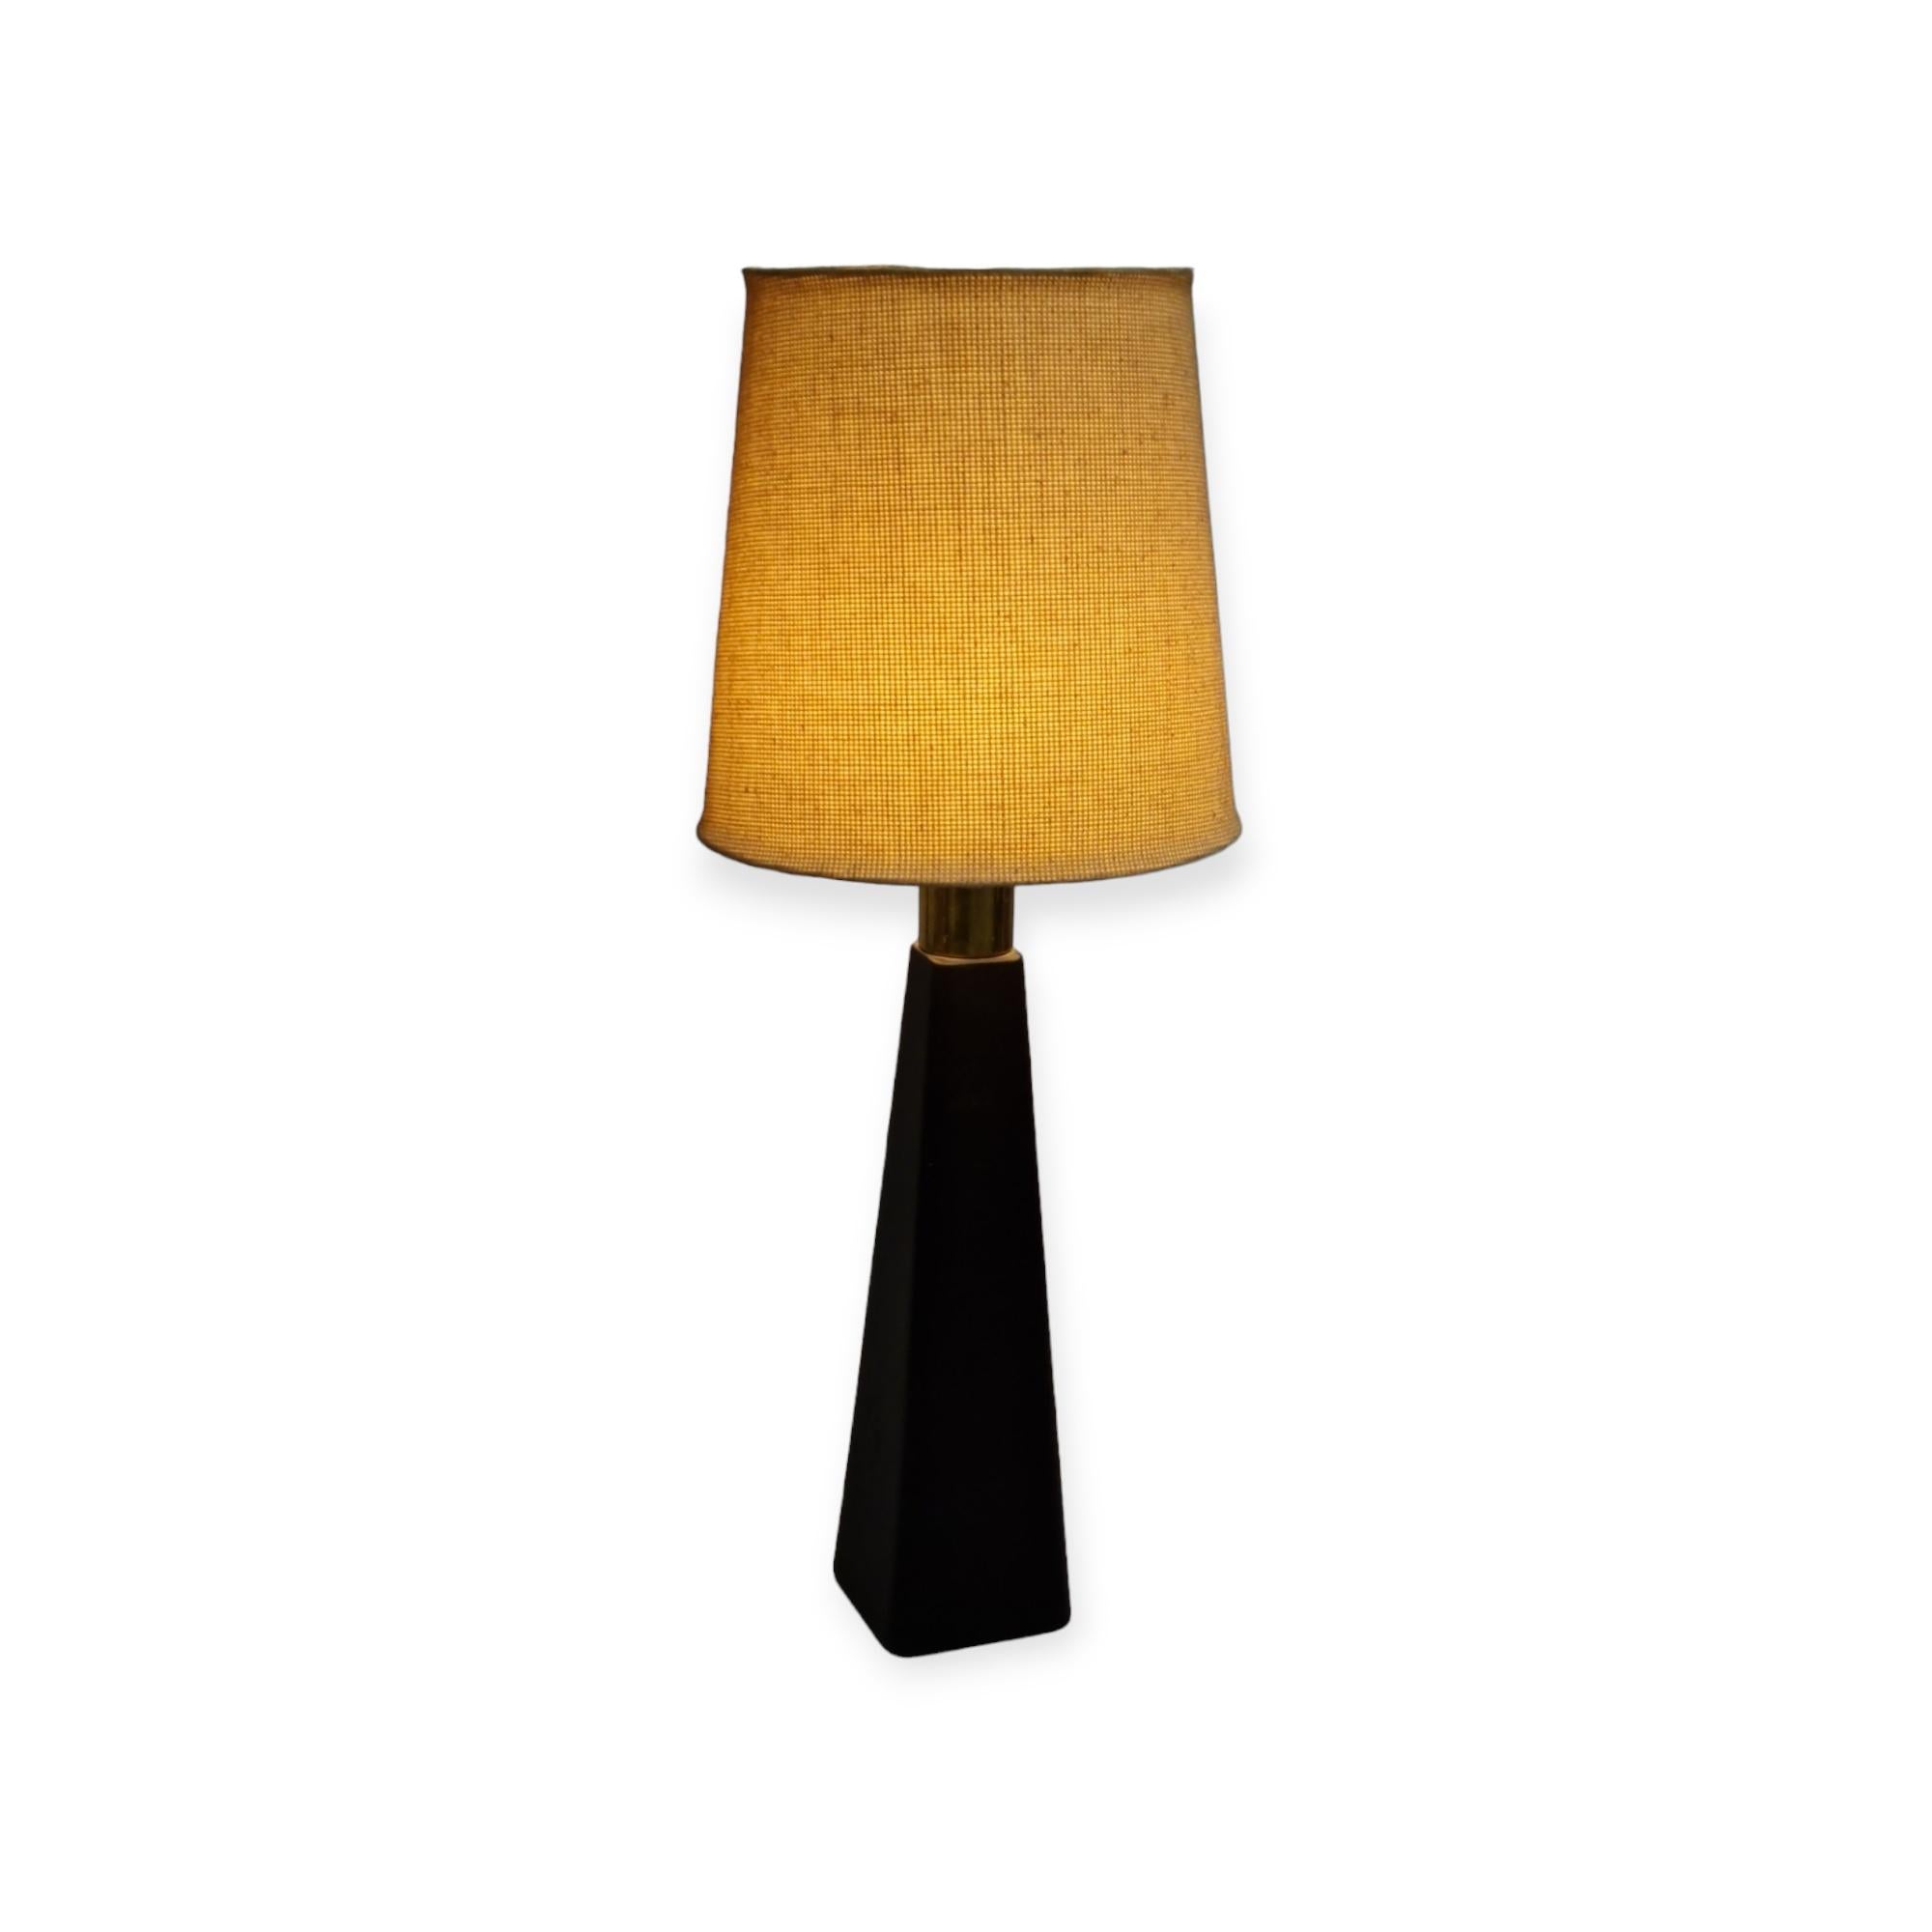 Scandinavian Modern Lisa Johansson-Papé Table Lamp 46-186 LJP in Leather and Linen, Orno For Sale